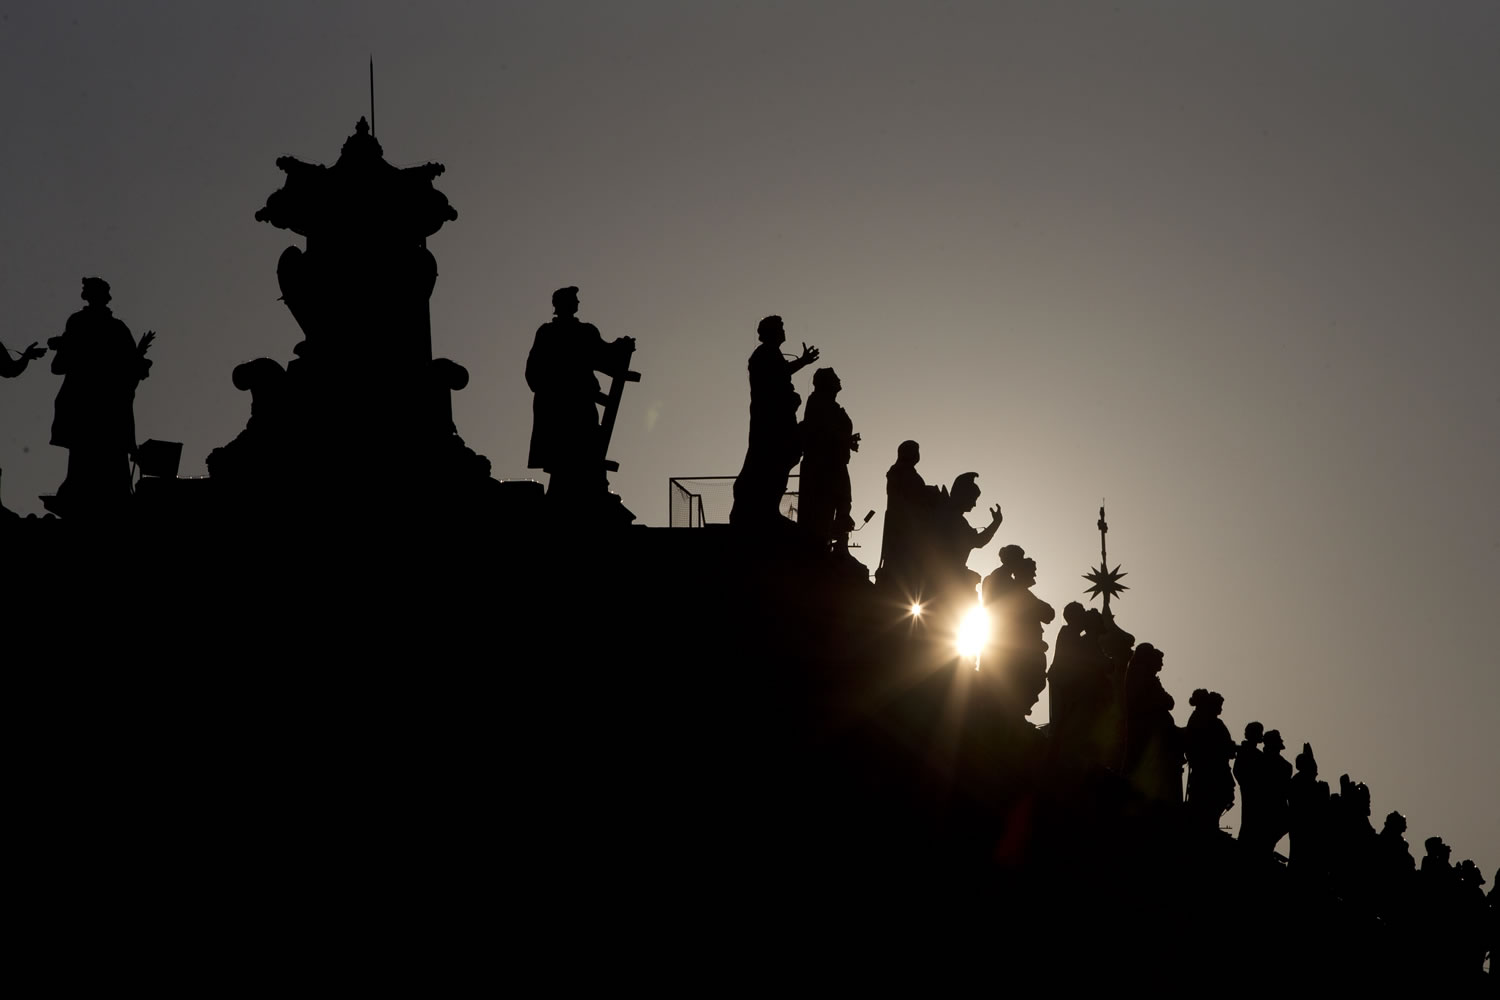 The sun sets behind the statues on top of the Bernini colonnade in St.